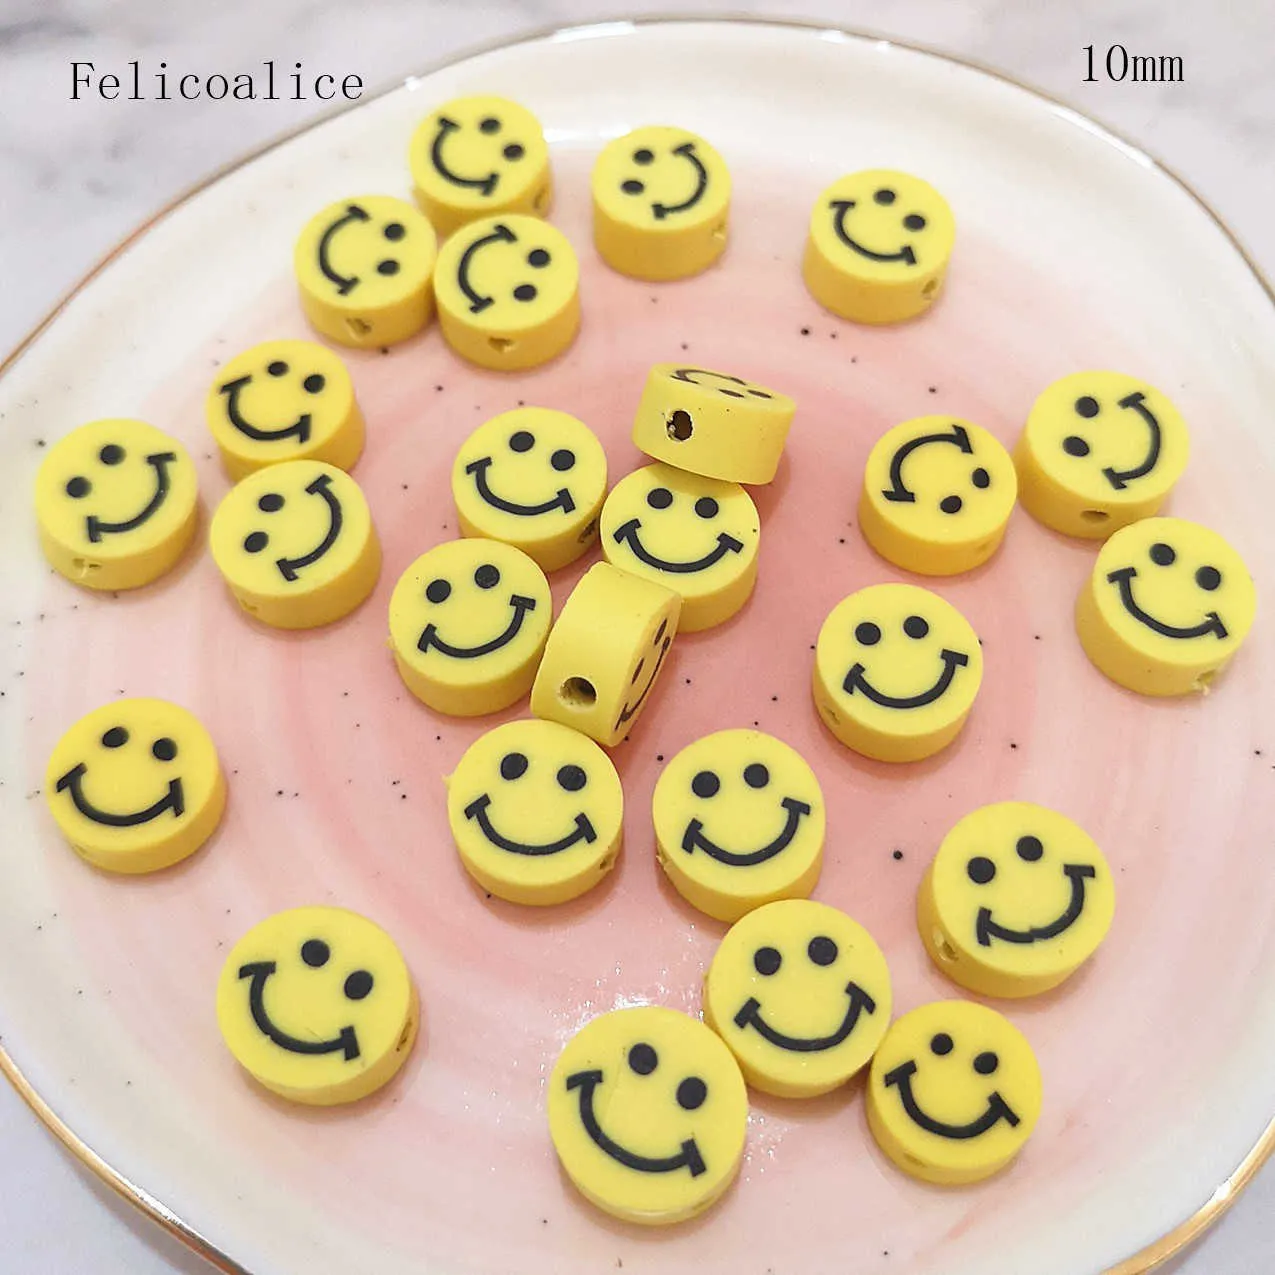 10mm Polymer Clay Flat Back Round Smiley Face Loose Beads For DIY Handmade Gift Jewelry Making Necklace Bracelet